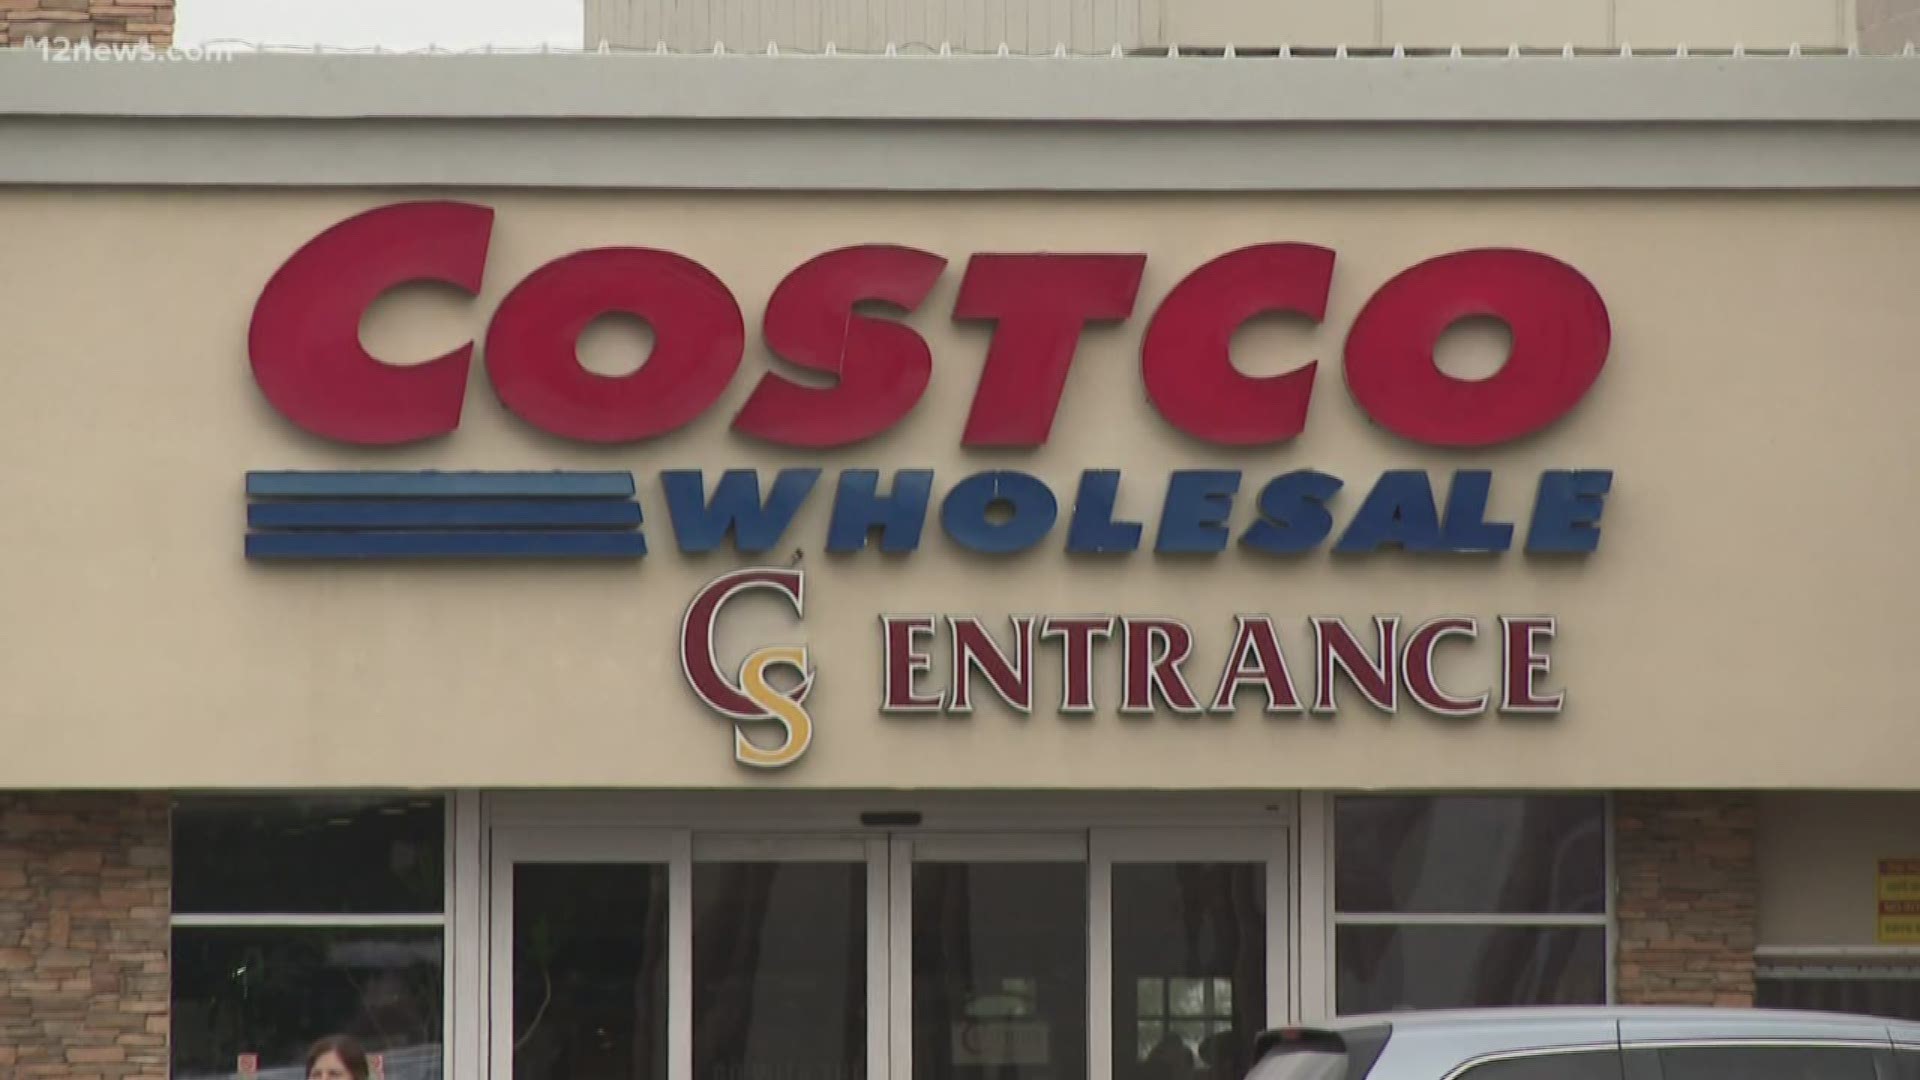 A Valley Costco closing down is the talk of social media. 12 News investigates if the Costco at Christown Spectrum Mall in north-central Phoenix is closing its doors